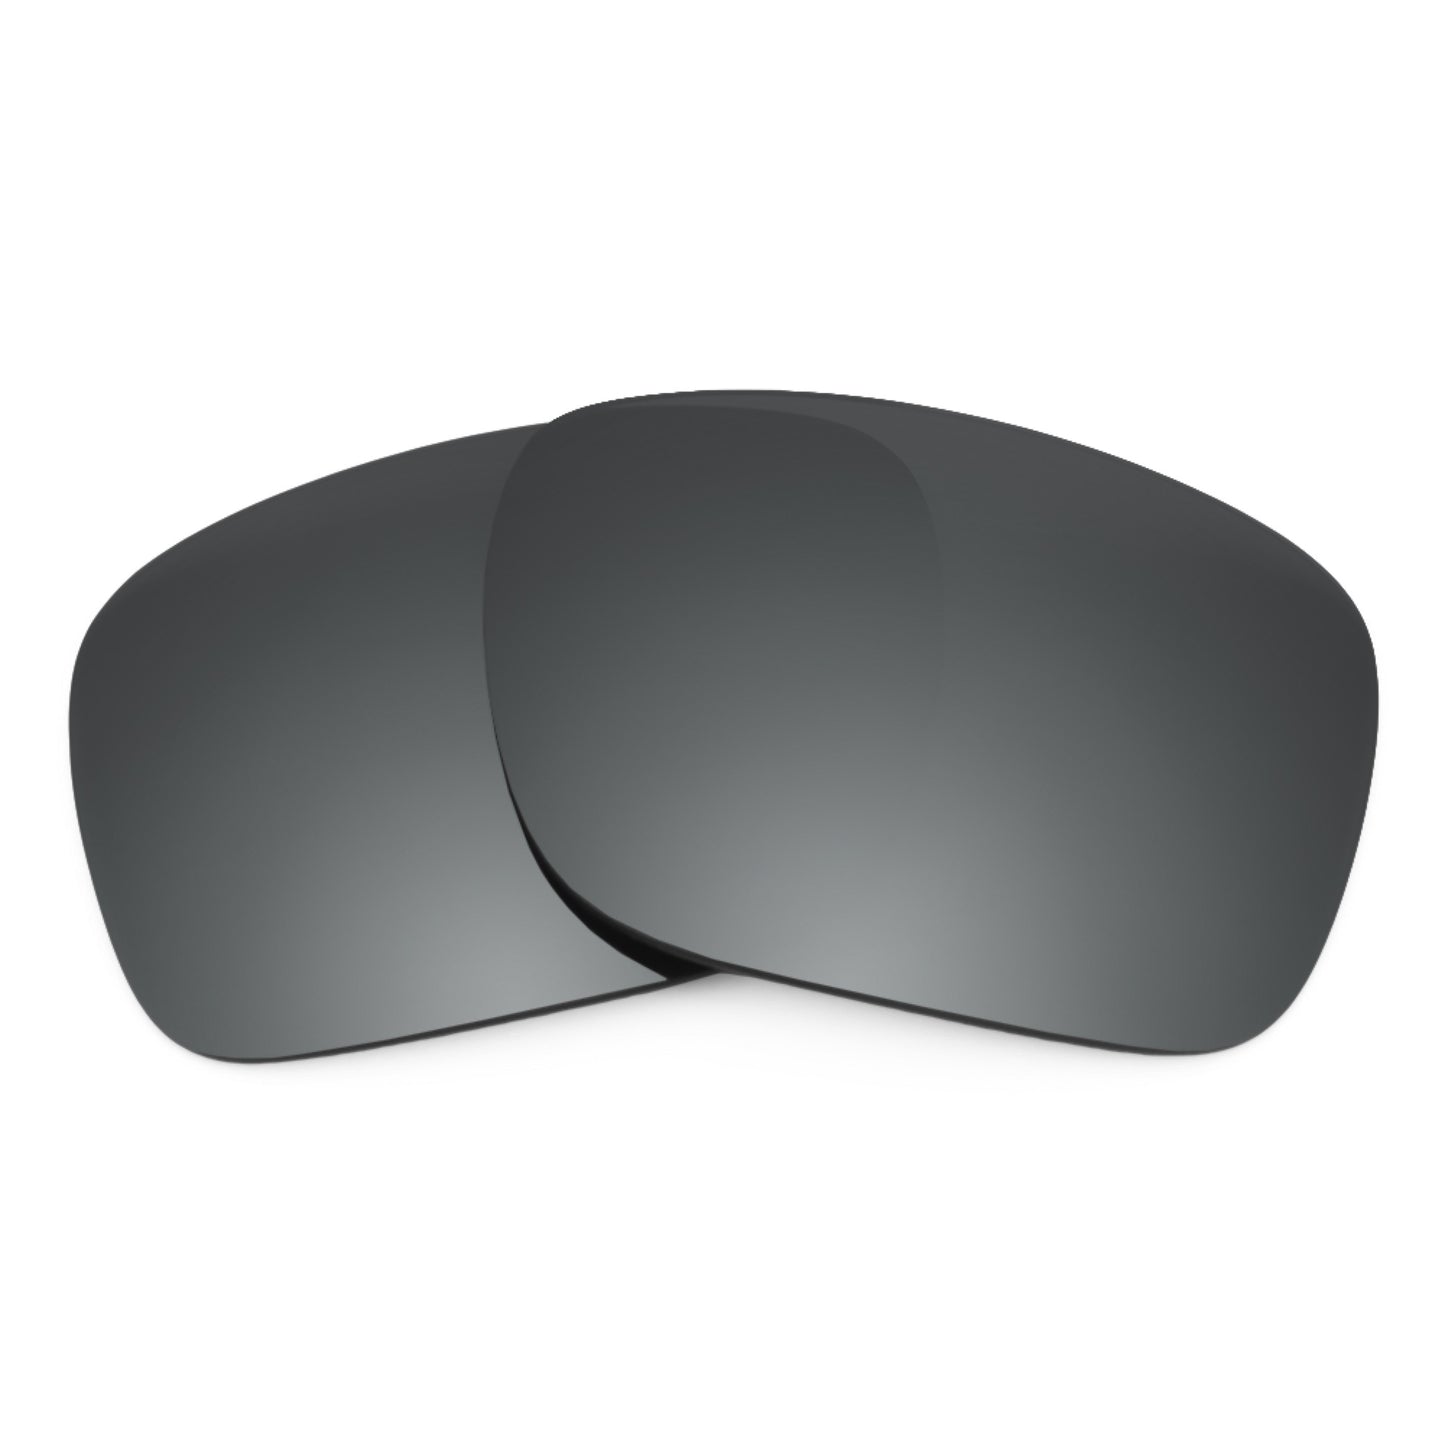 Revant replacement lenses for Ray-Ban Drifter (B&L) 56mm Non-Polarized Black Chrome